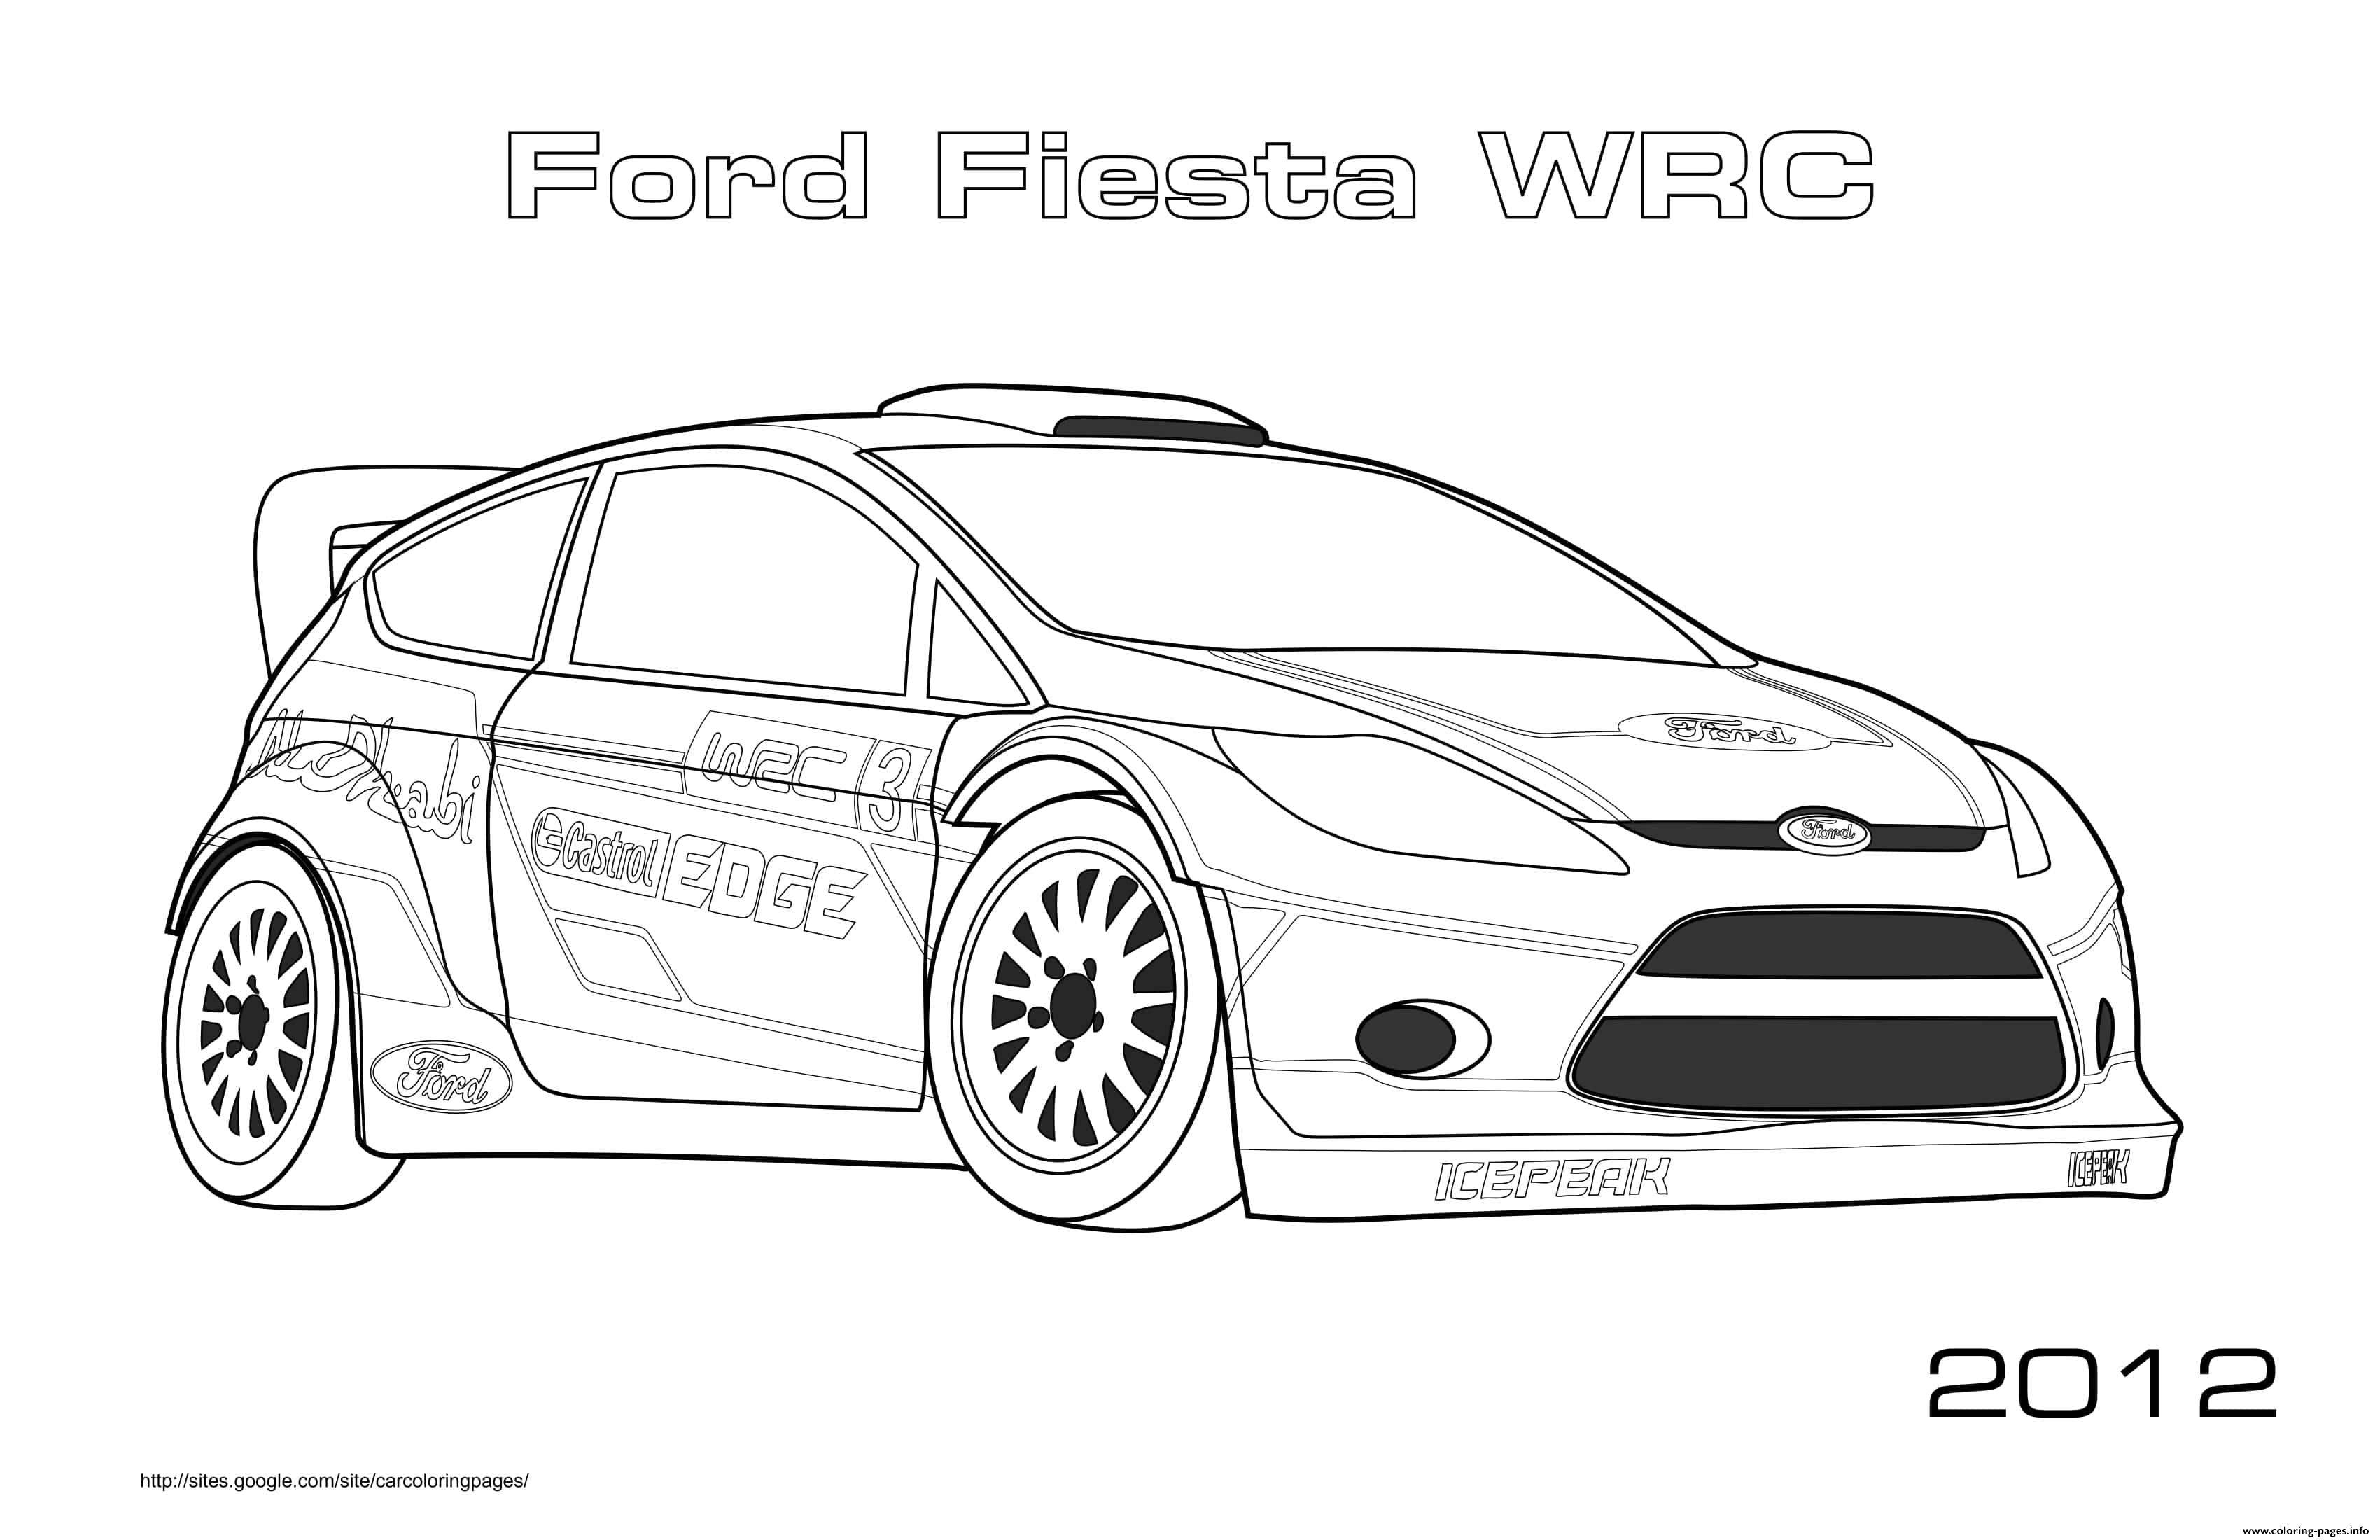 Ford Fiesta Wrc 2012 coloring